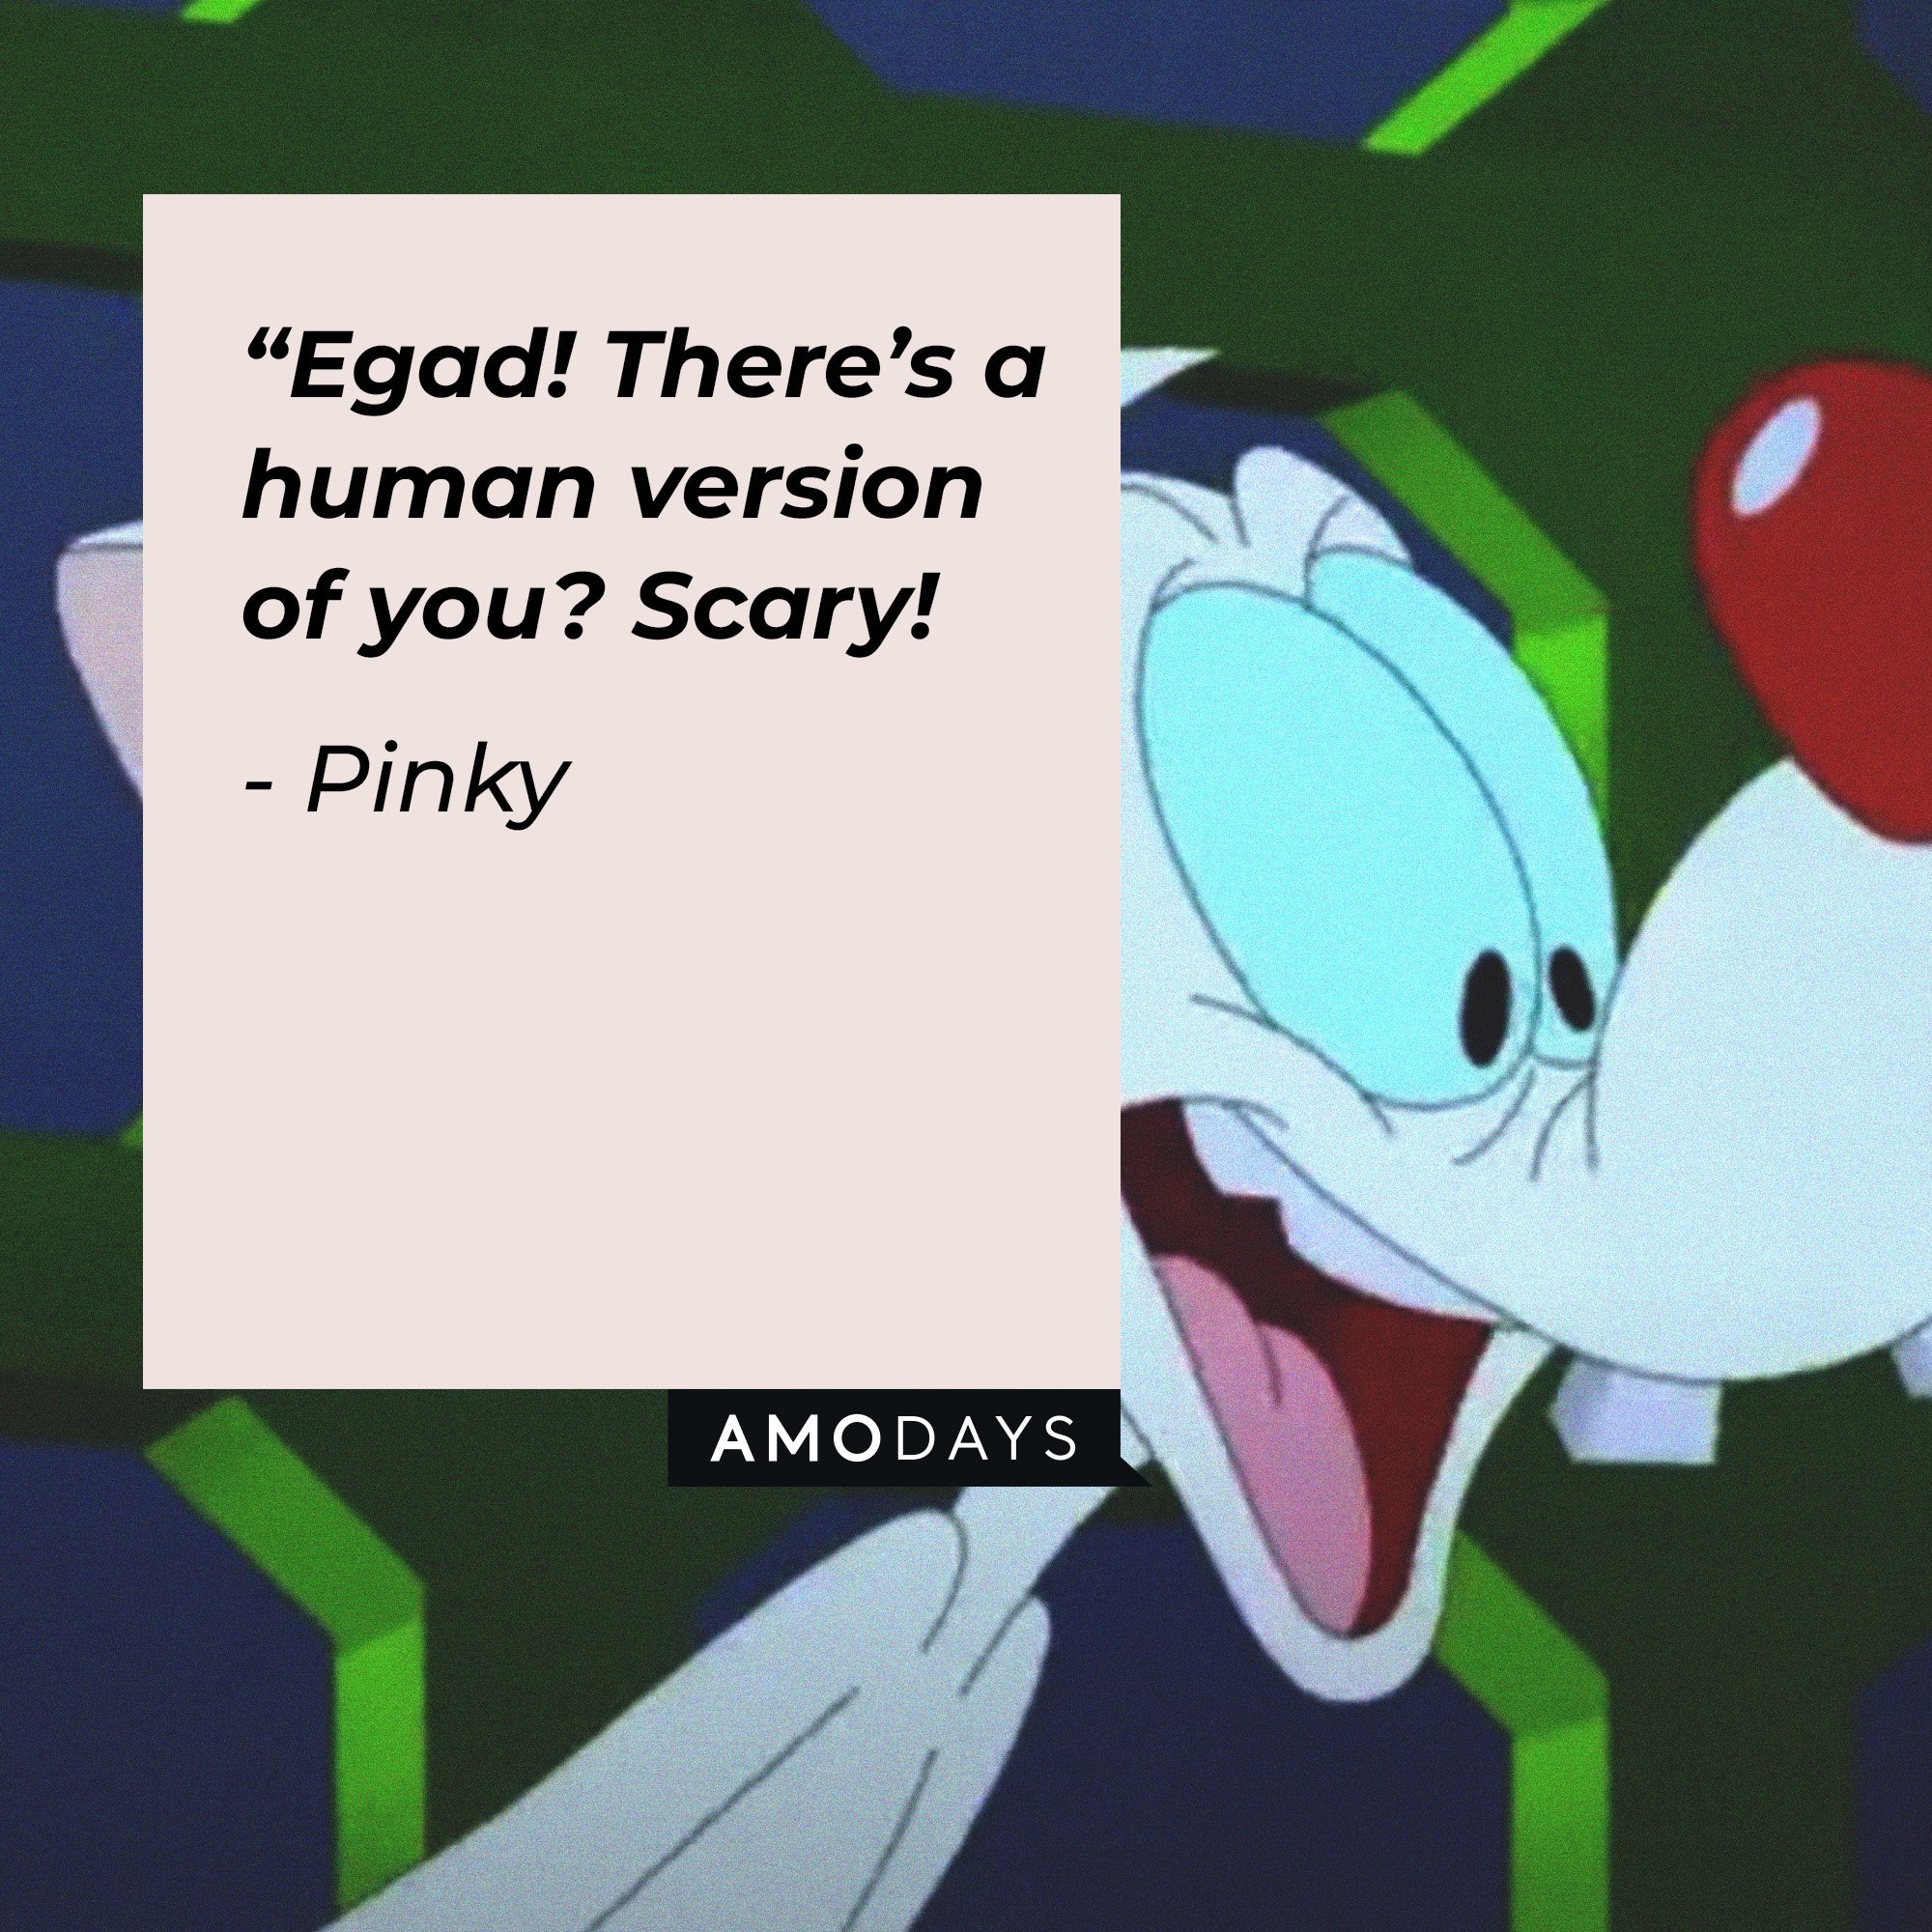  Pinky's quote: “Egad! There’s a human version of you? Scary!” | Image: AmoDays